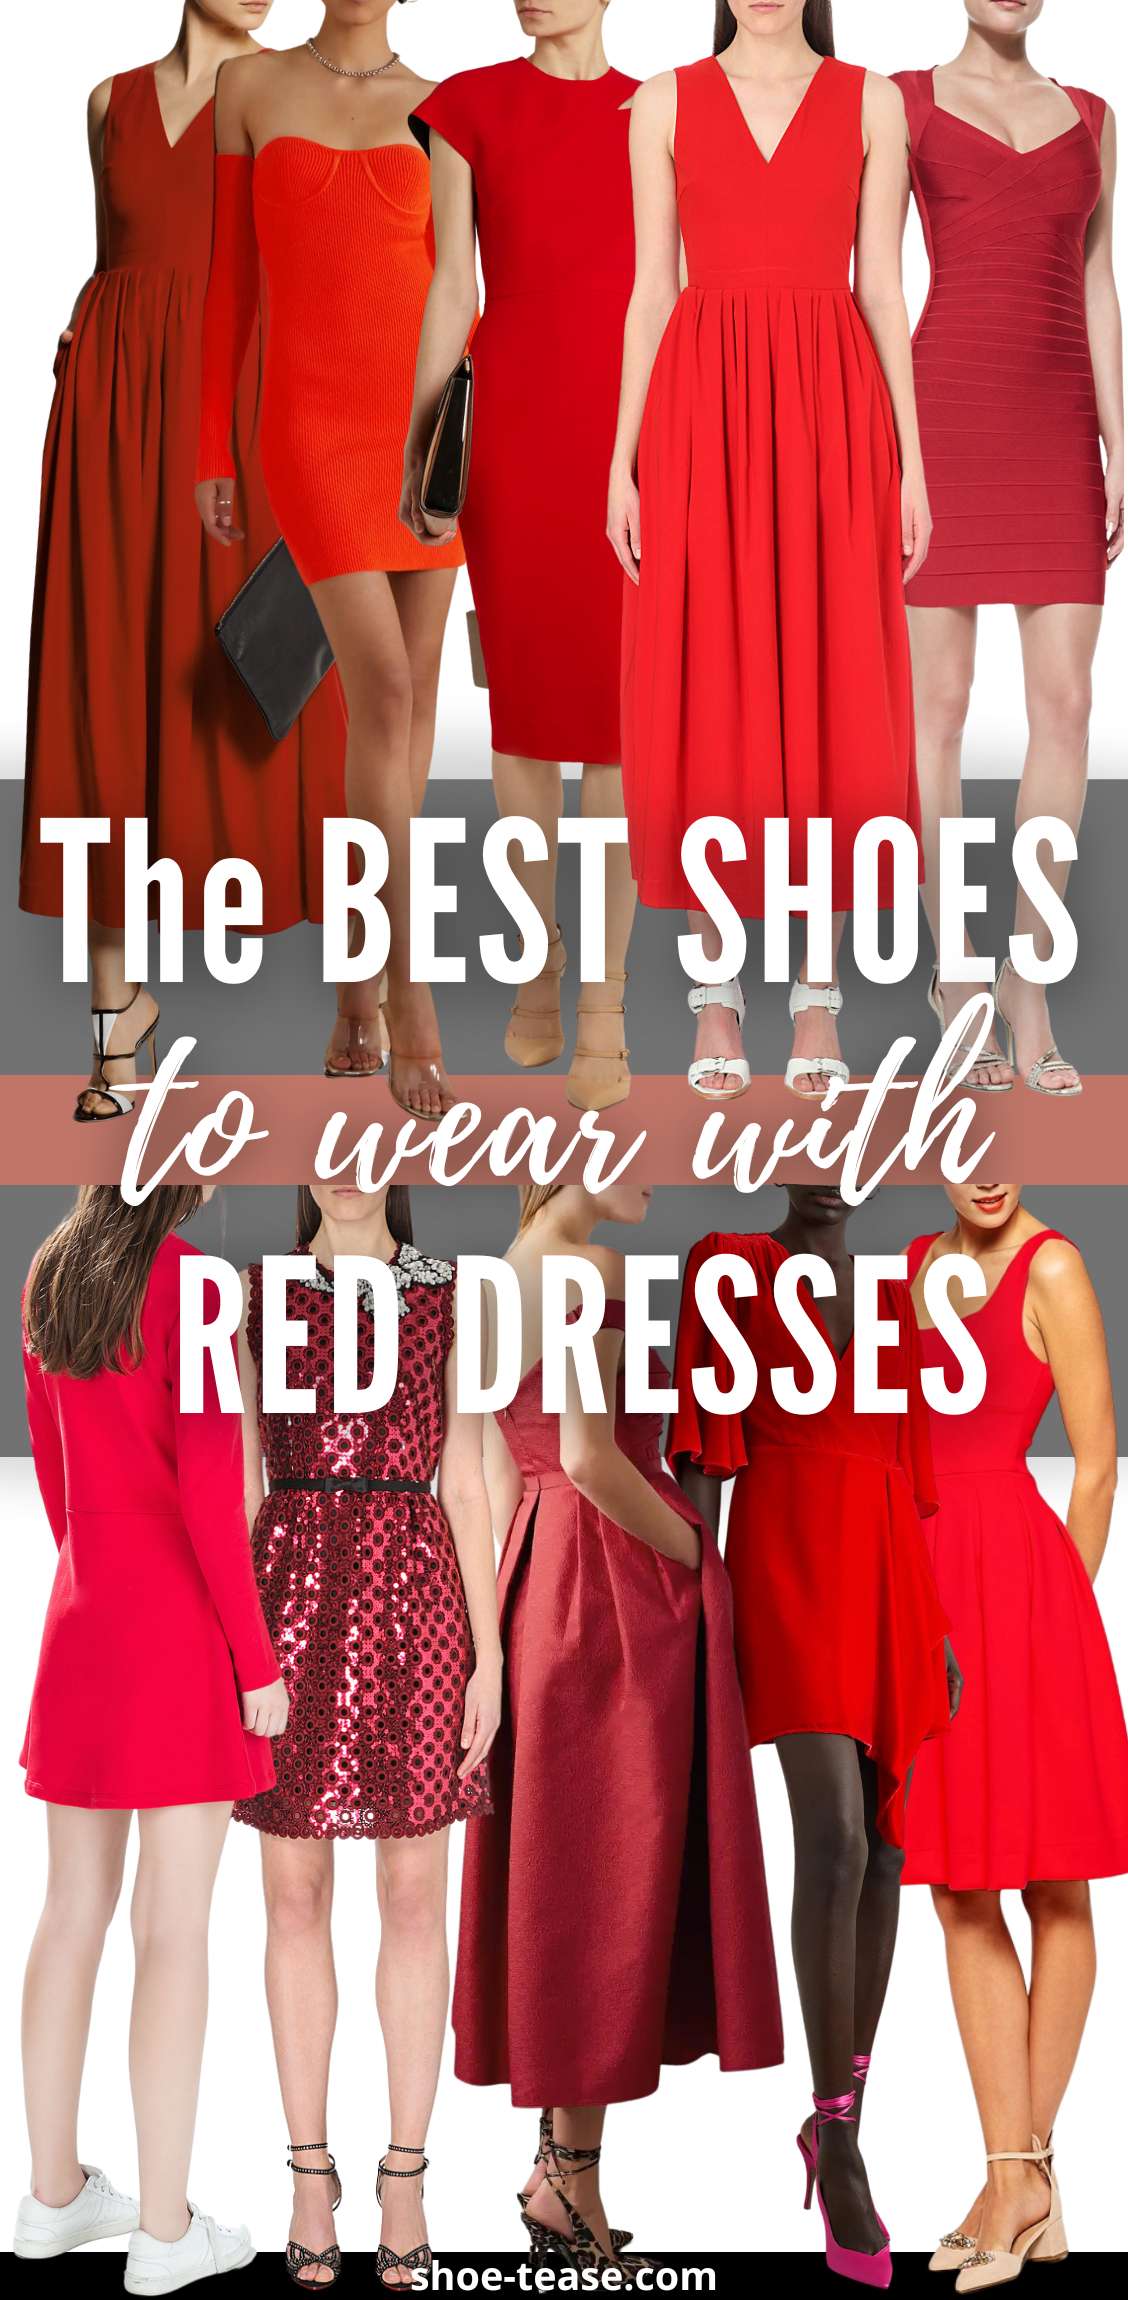 Collage of 10 women wearing different color shoes with a red dress.